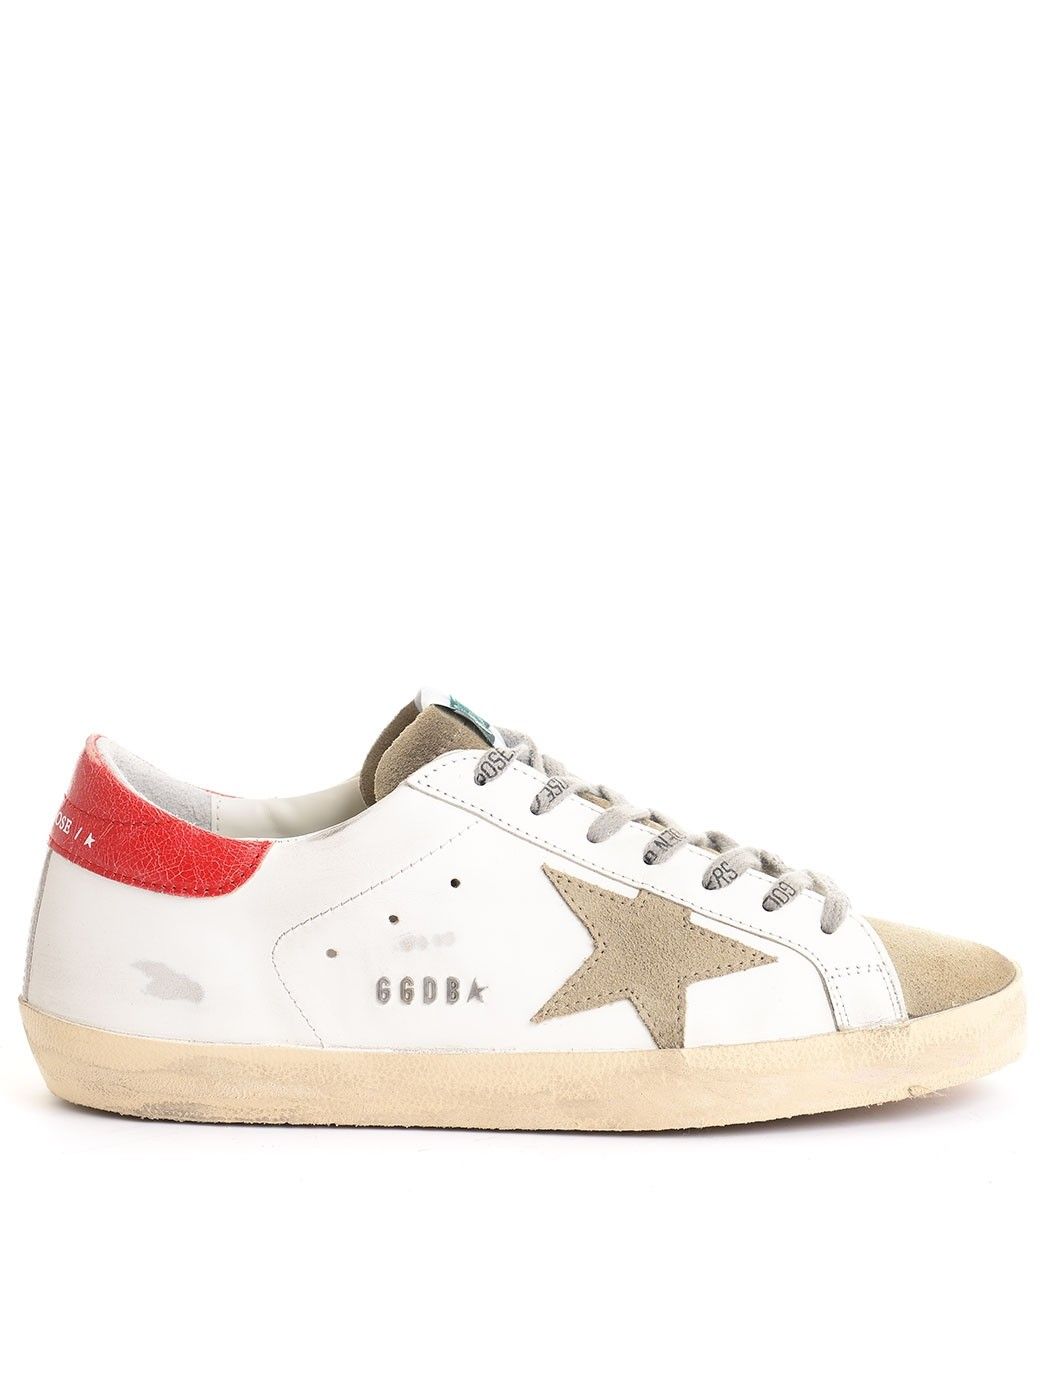  MAN SHOES,CHURCH'S SHOES,CHURCH'S LOAFER SHOES,GOLDEN GOOSE SNEAKERS,GOLDEN GOOSE SHOES,DIADORA HERITAGE SNEAKERS  GOLDEN GOOSE GMF00101